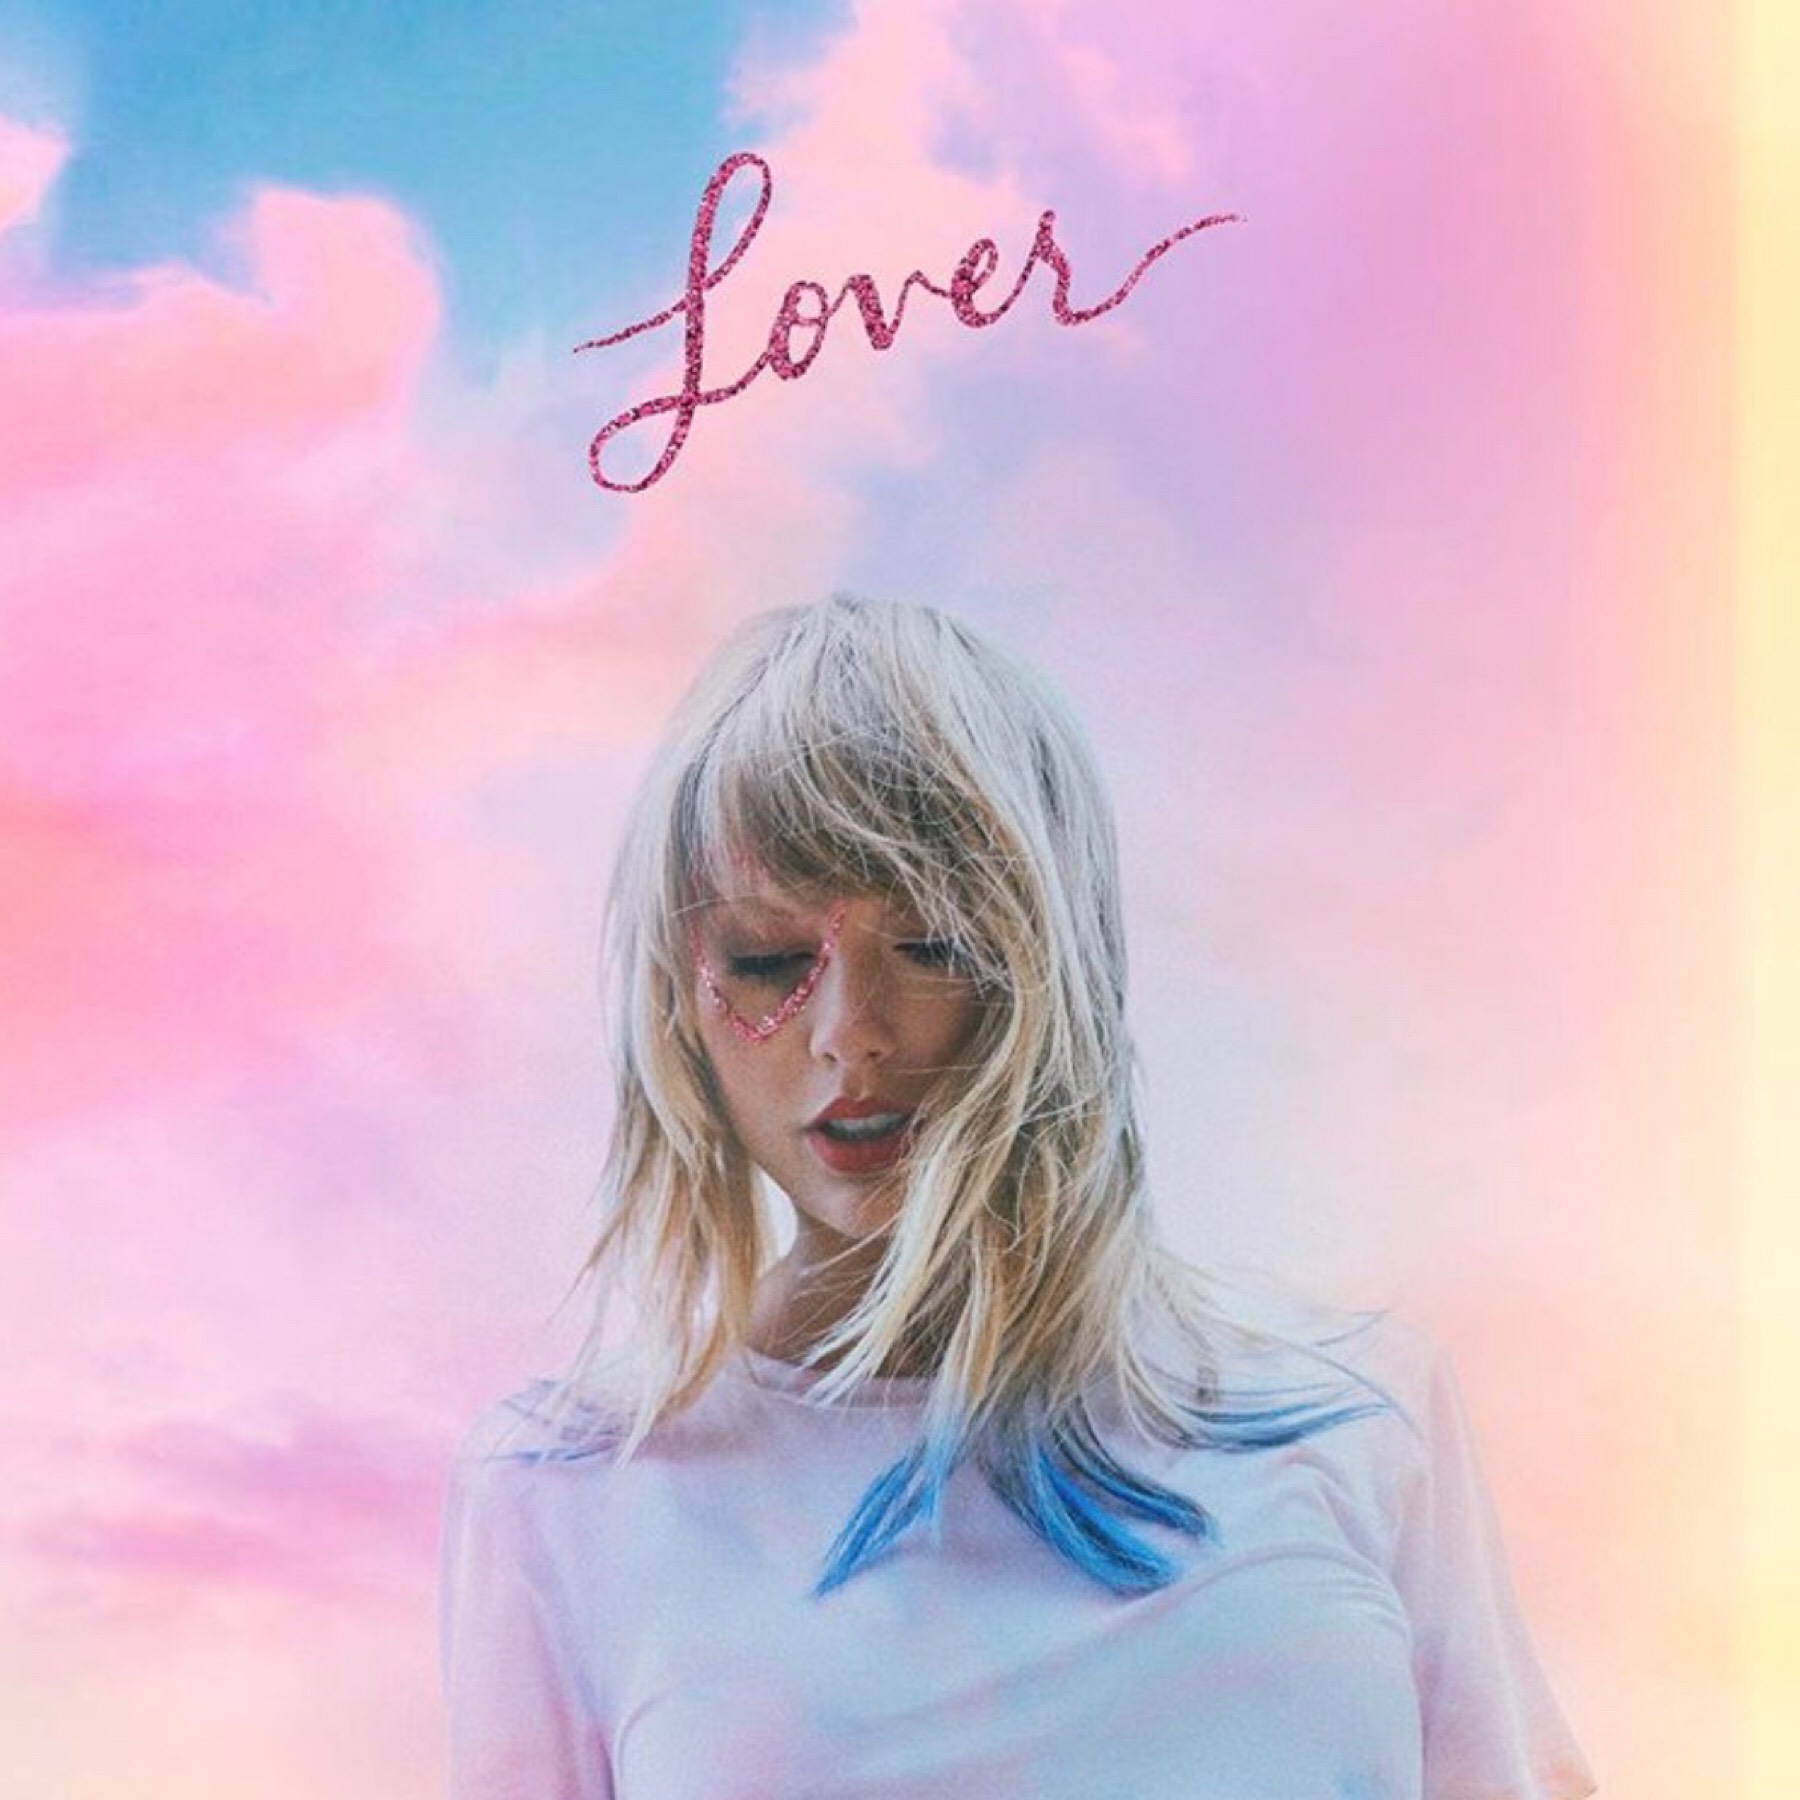 Lover, Taylor Swift’s 7th studio album, comes out on August 23rd! 🦋💖